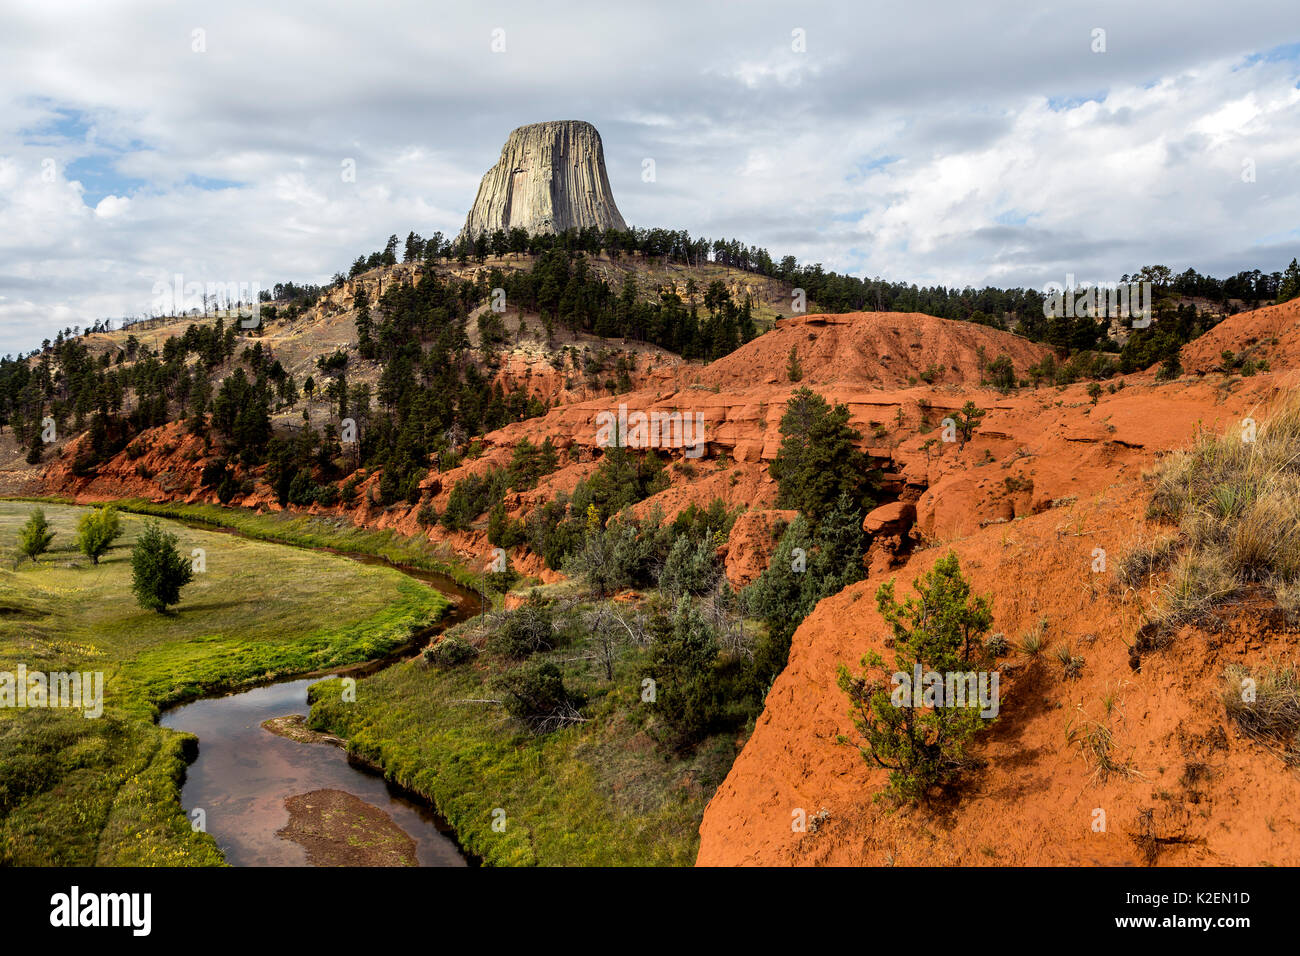 Devils Tower with the Red Beds and Belle Fourche River in Devils Tower National Monument, Wyoming, USA, September 2016. Stock Photo